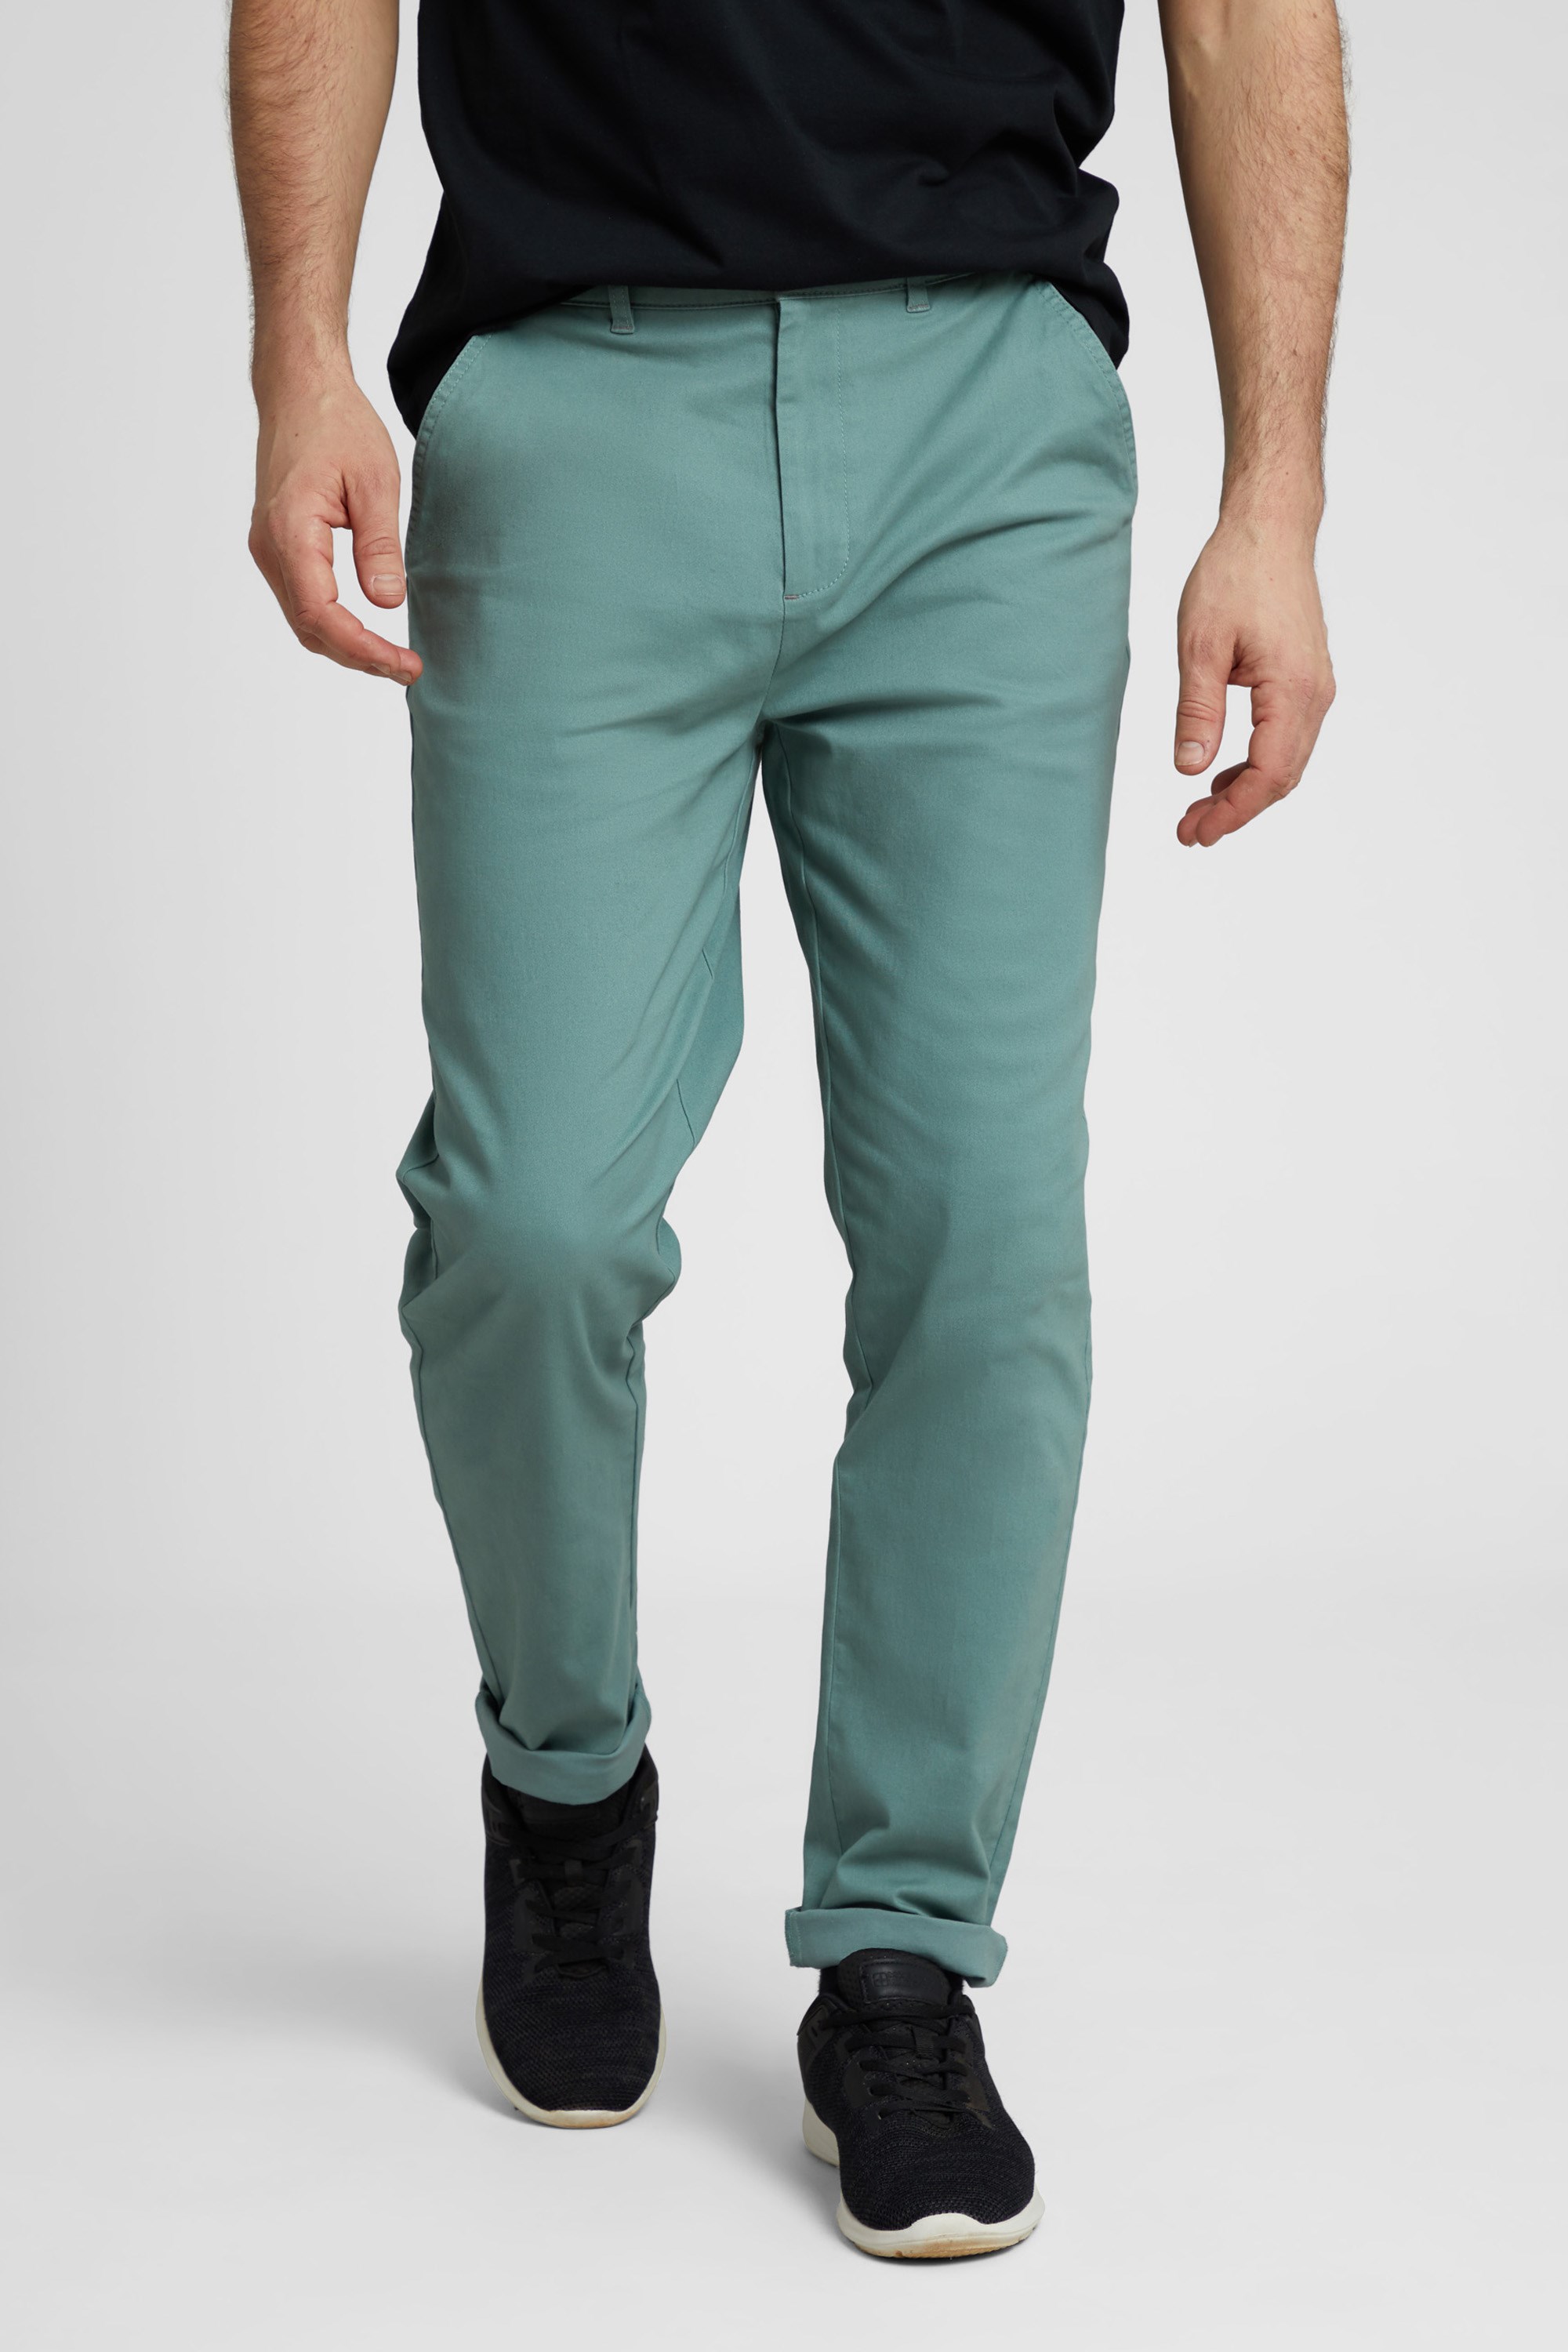 Woods Mens Chino Trousers - Green